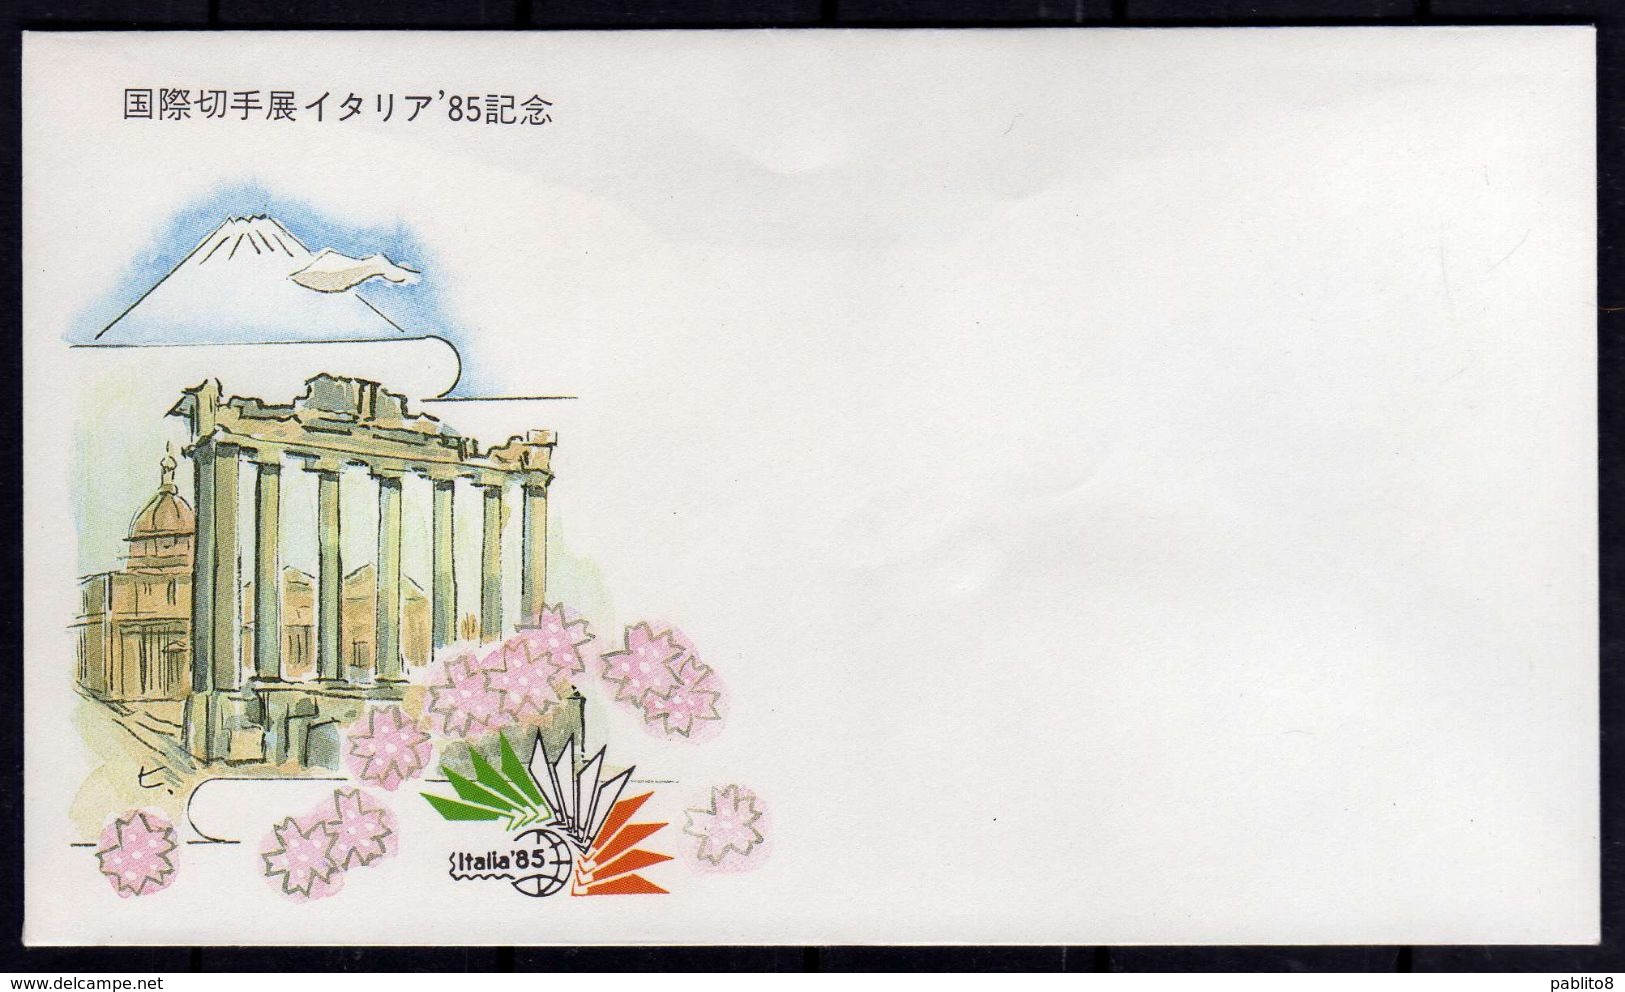 JAPAN NIPPON GIAPPONE JAPON 1985 ITALIA 85 PHILATELIC EXHIBITION STAMP ESPOSITION POSTAL ENTIRE COVER UNUSED - Covers